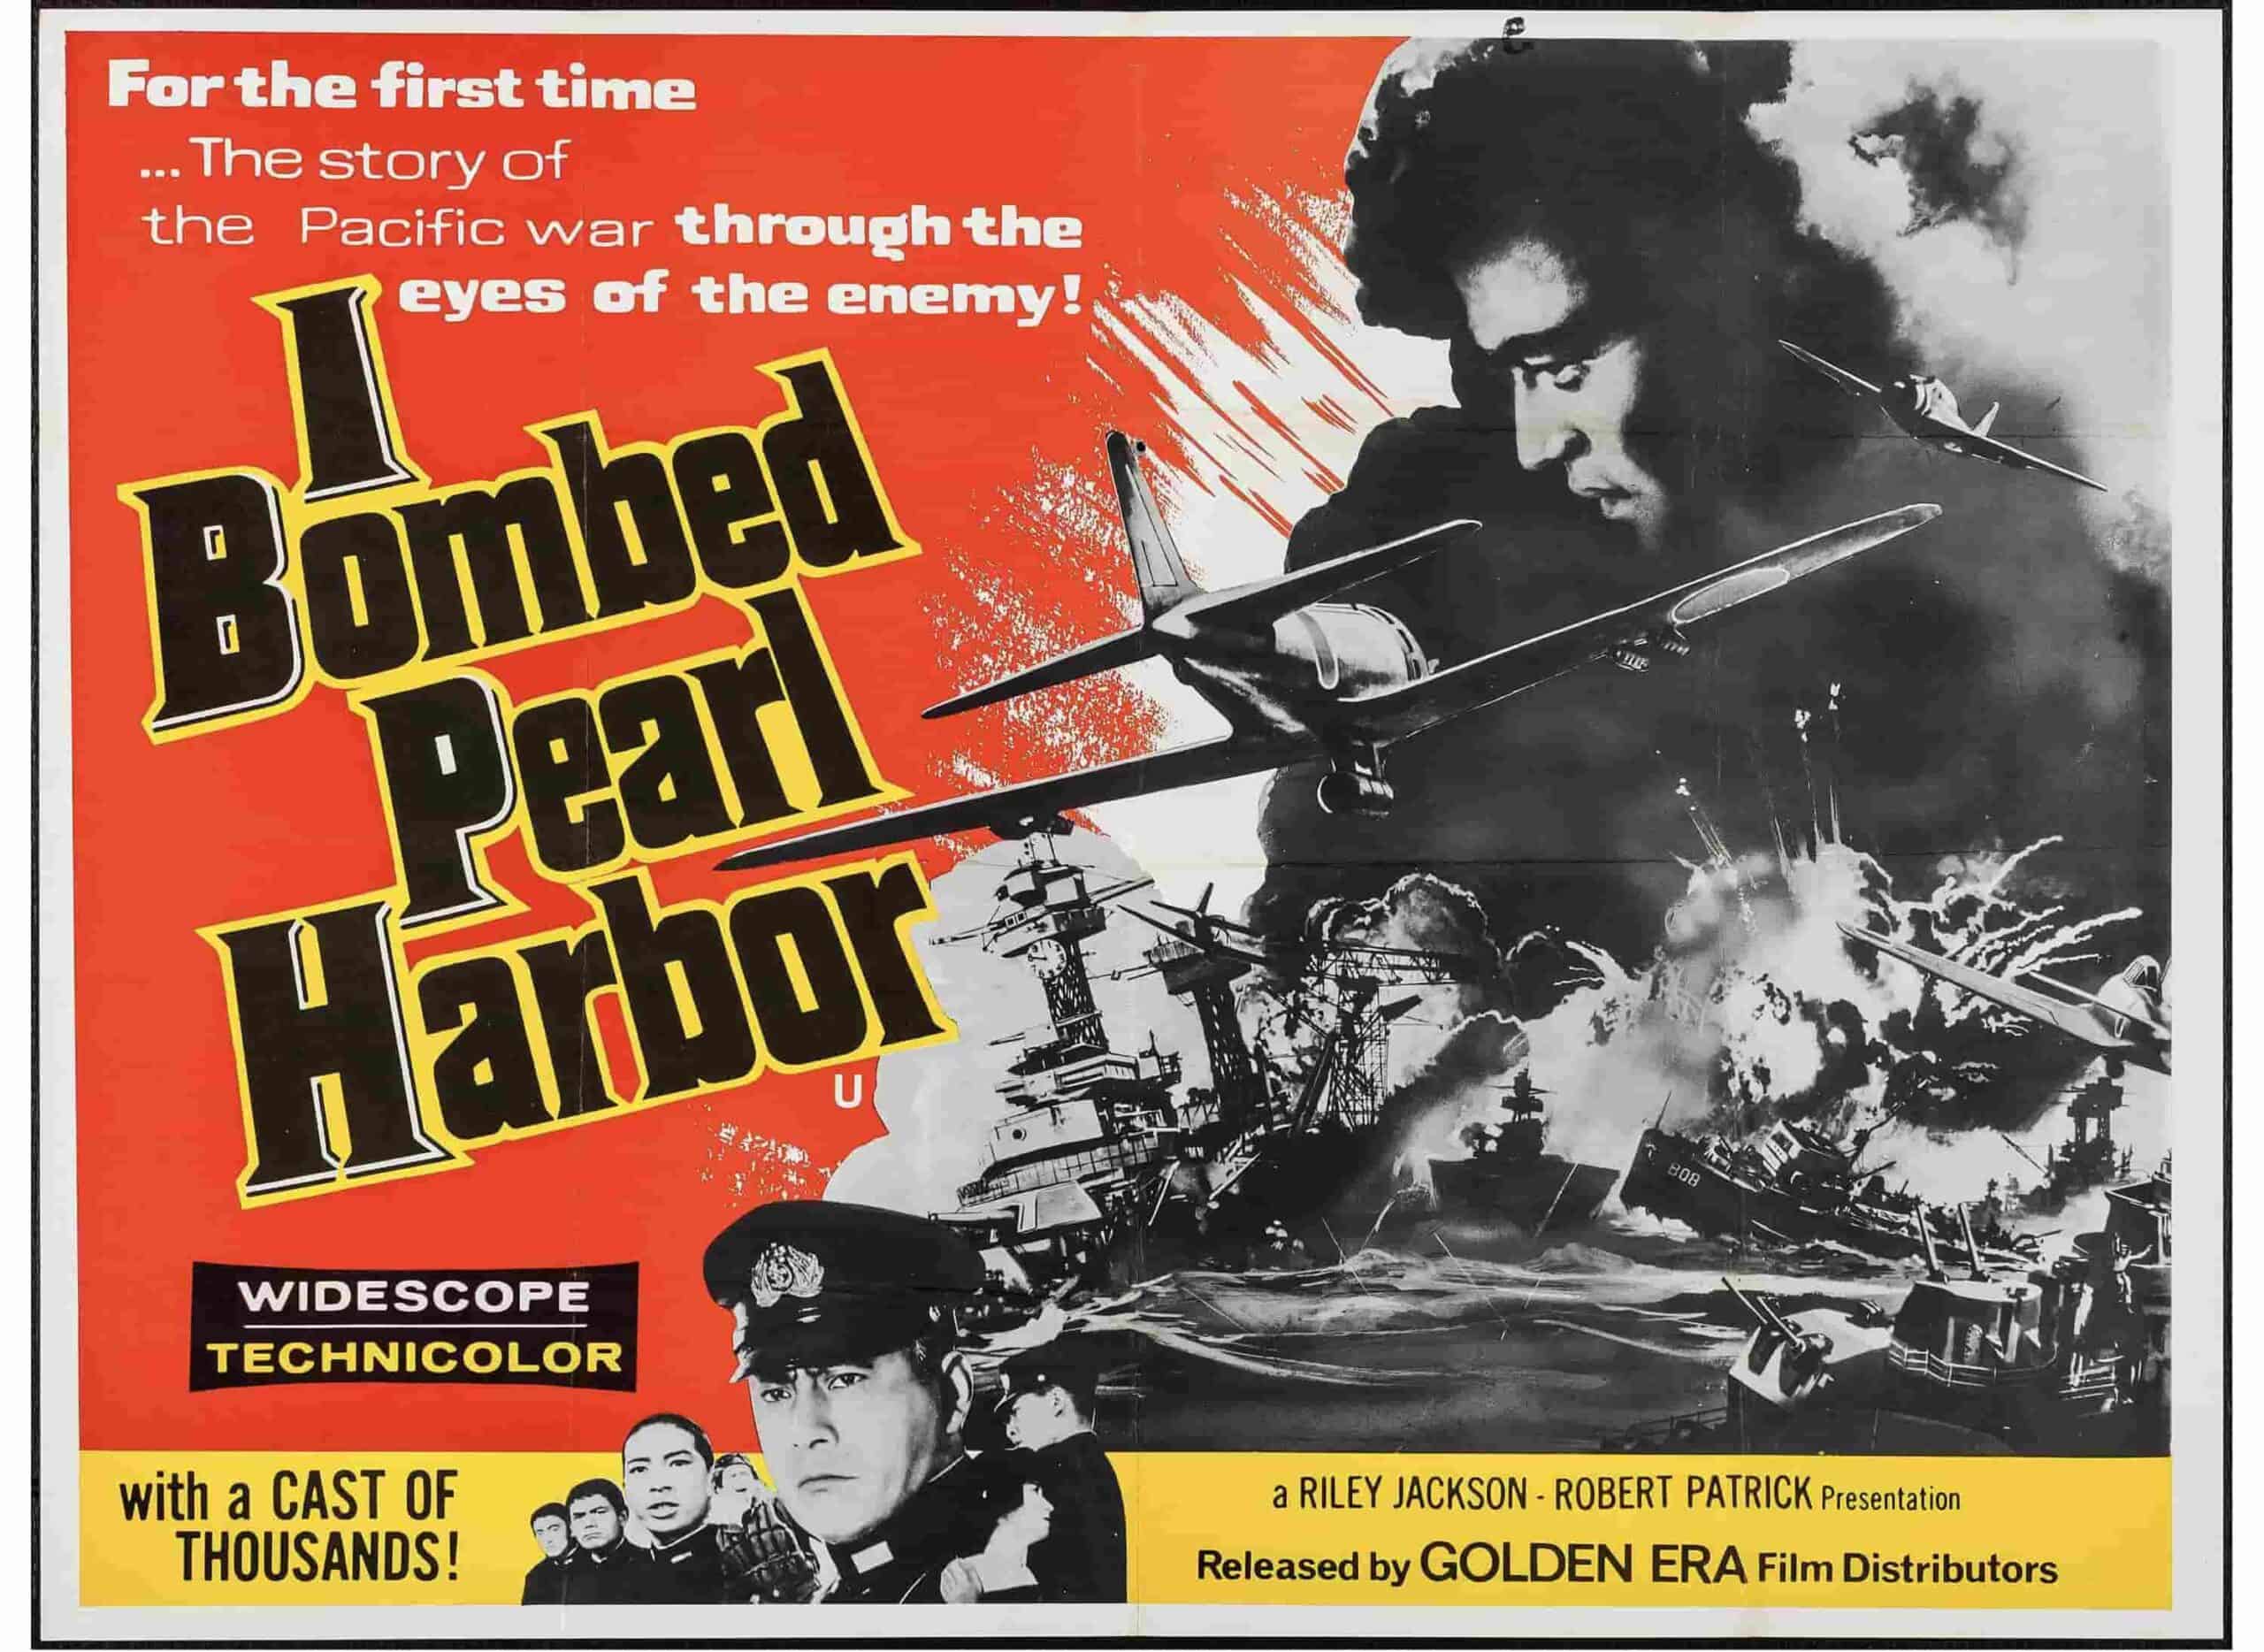 I Bombed Pearl Harbor (April 26, 1960) 13 Best Pearl Harbor Movies You Can't Miss